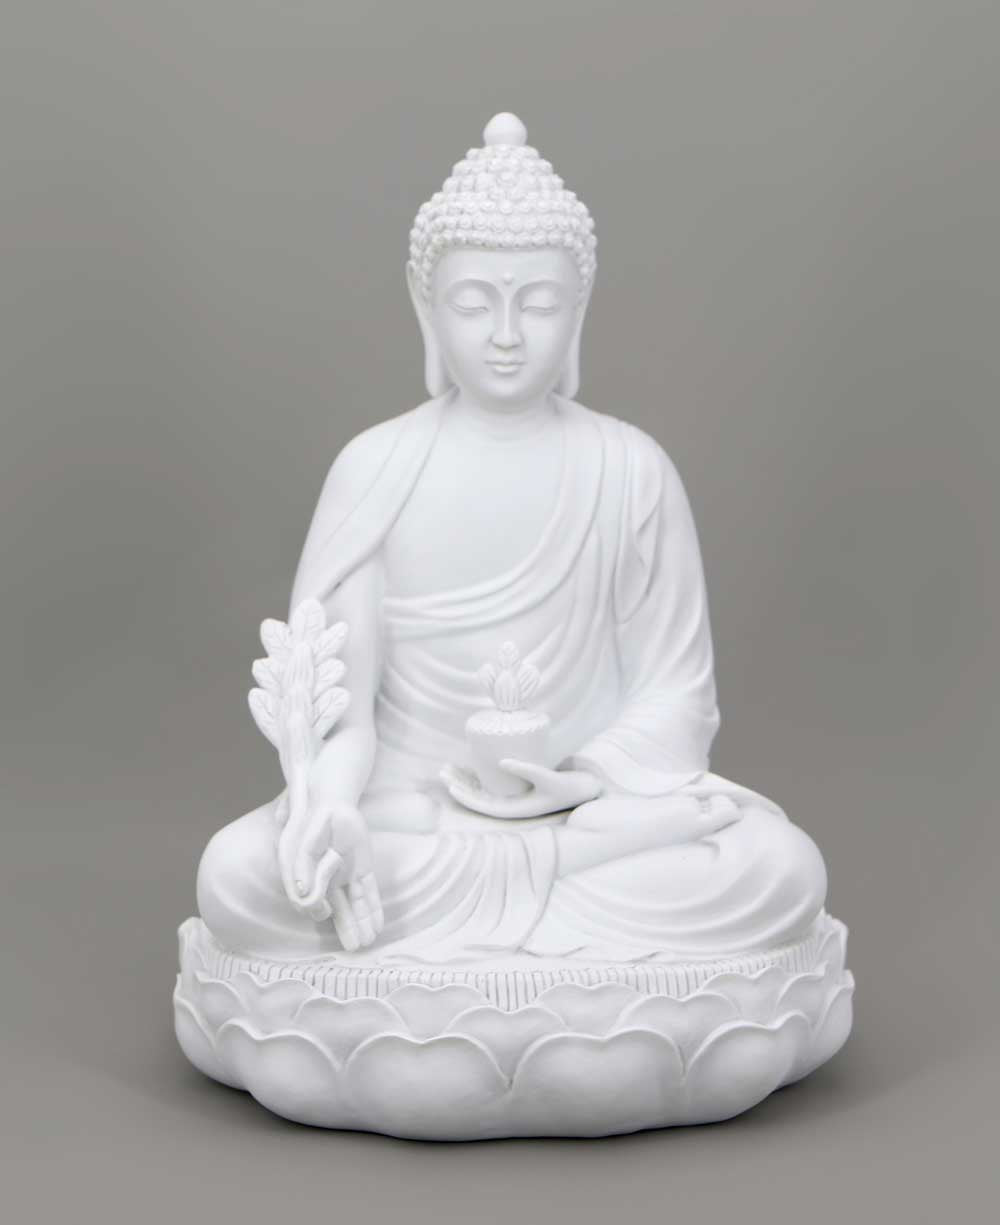 Healing White Medicine Buddha Statue, Indoor and Outdoor Use - Sculptures & Statues